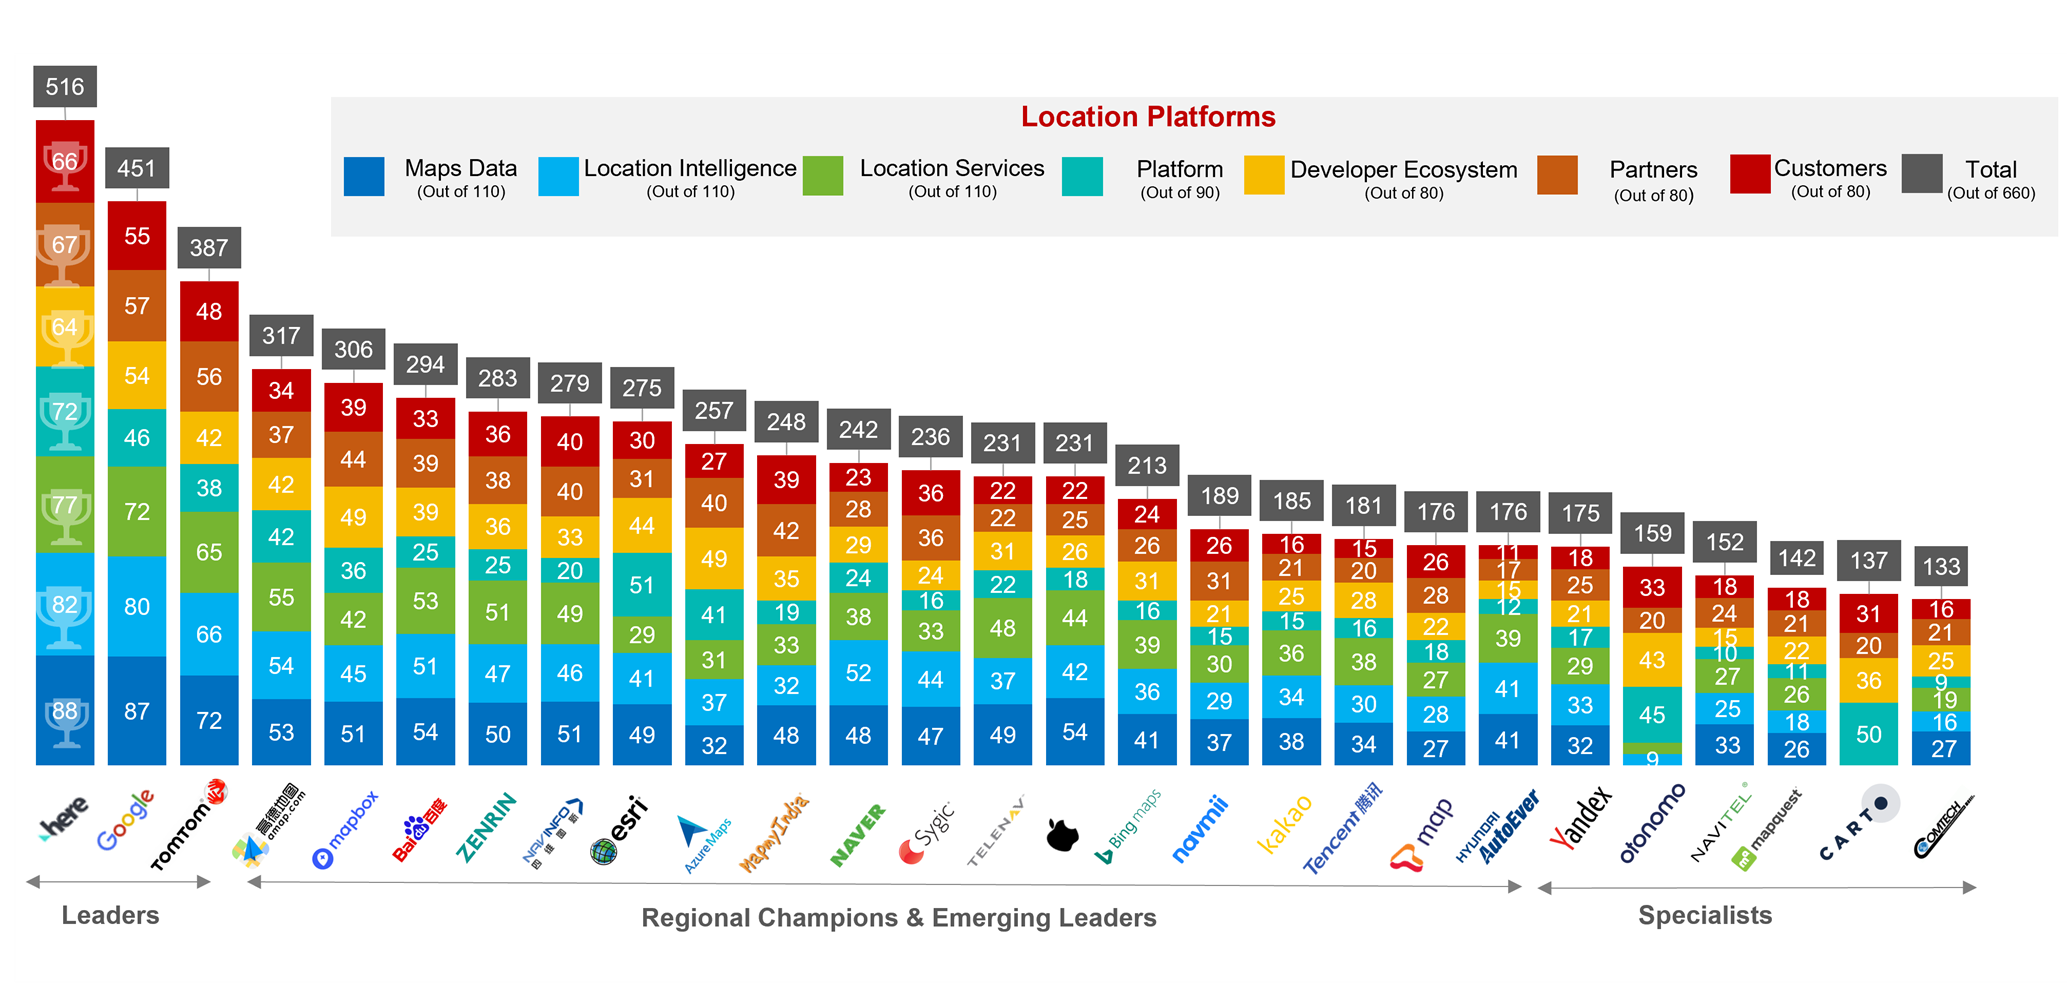 Counterpoint Research CORE Analysis - Location Platforms Evaluation 2021